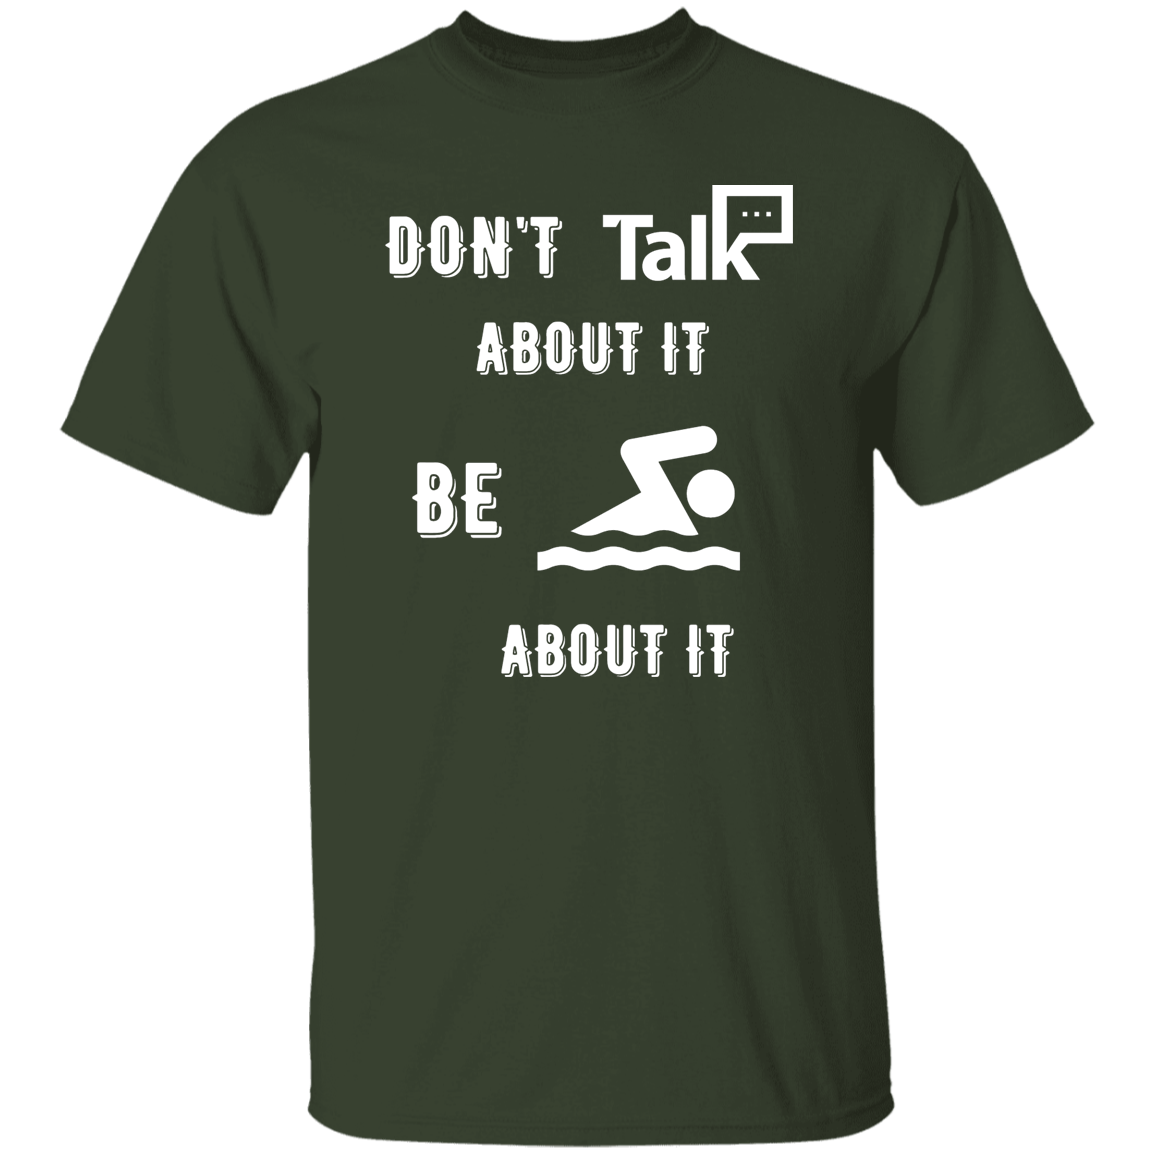 Don't Talk About It - Swimming Short Sleeve Shirt